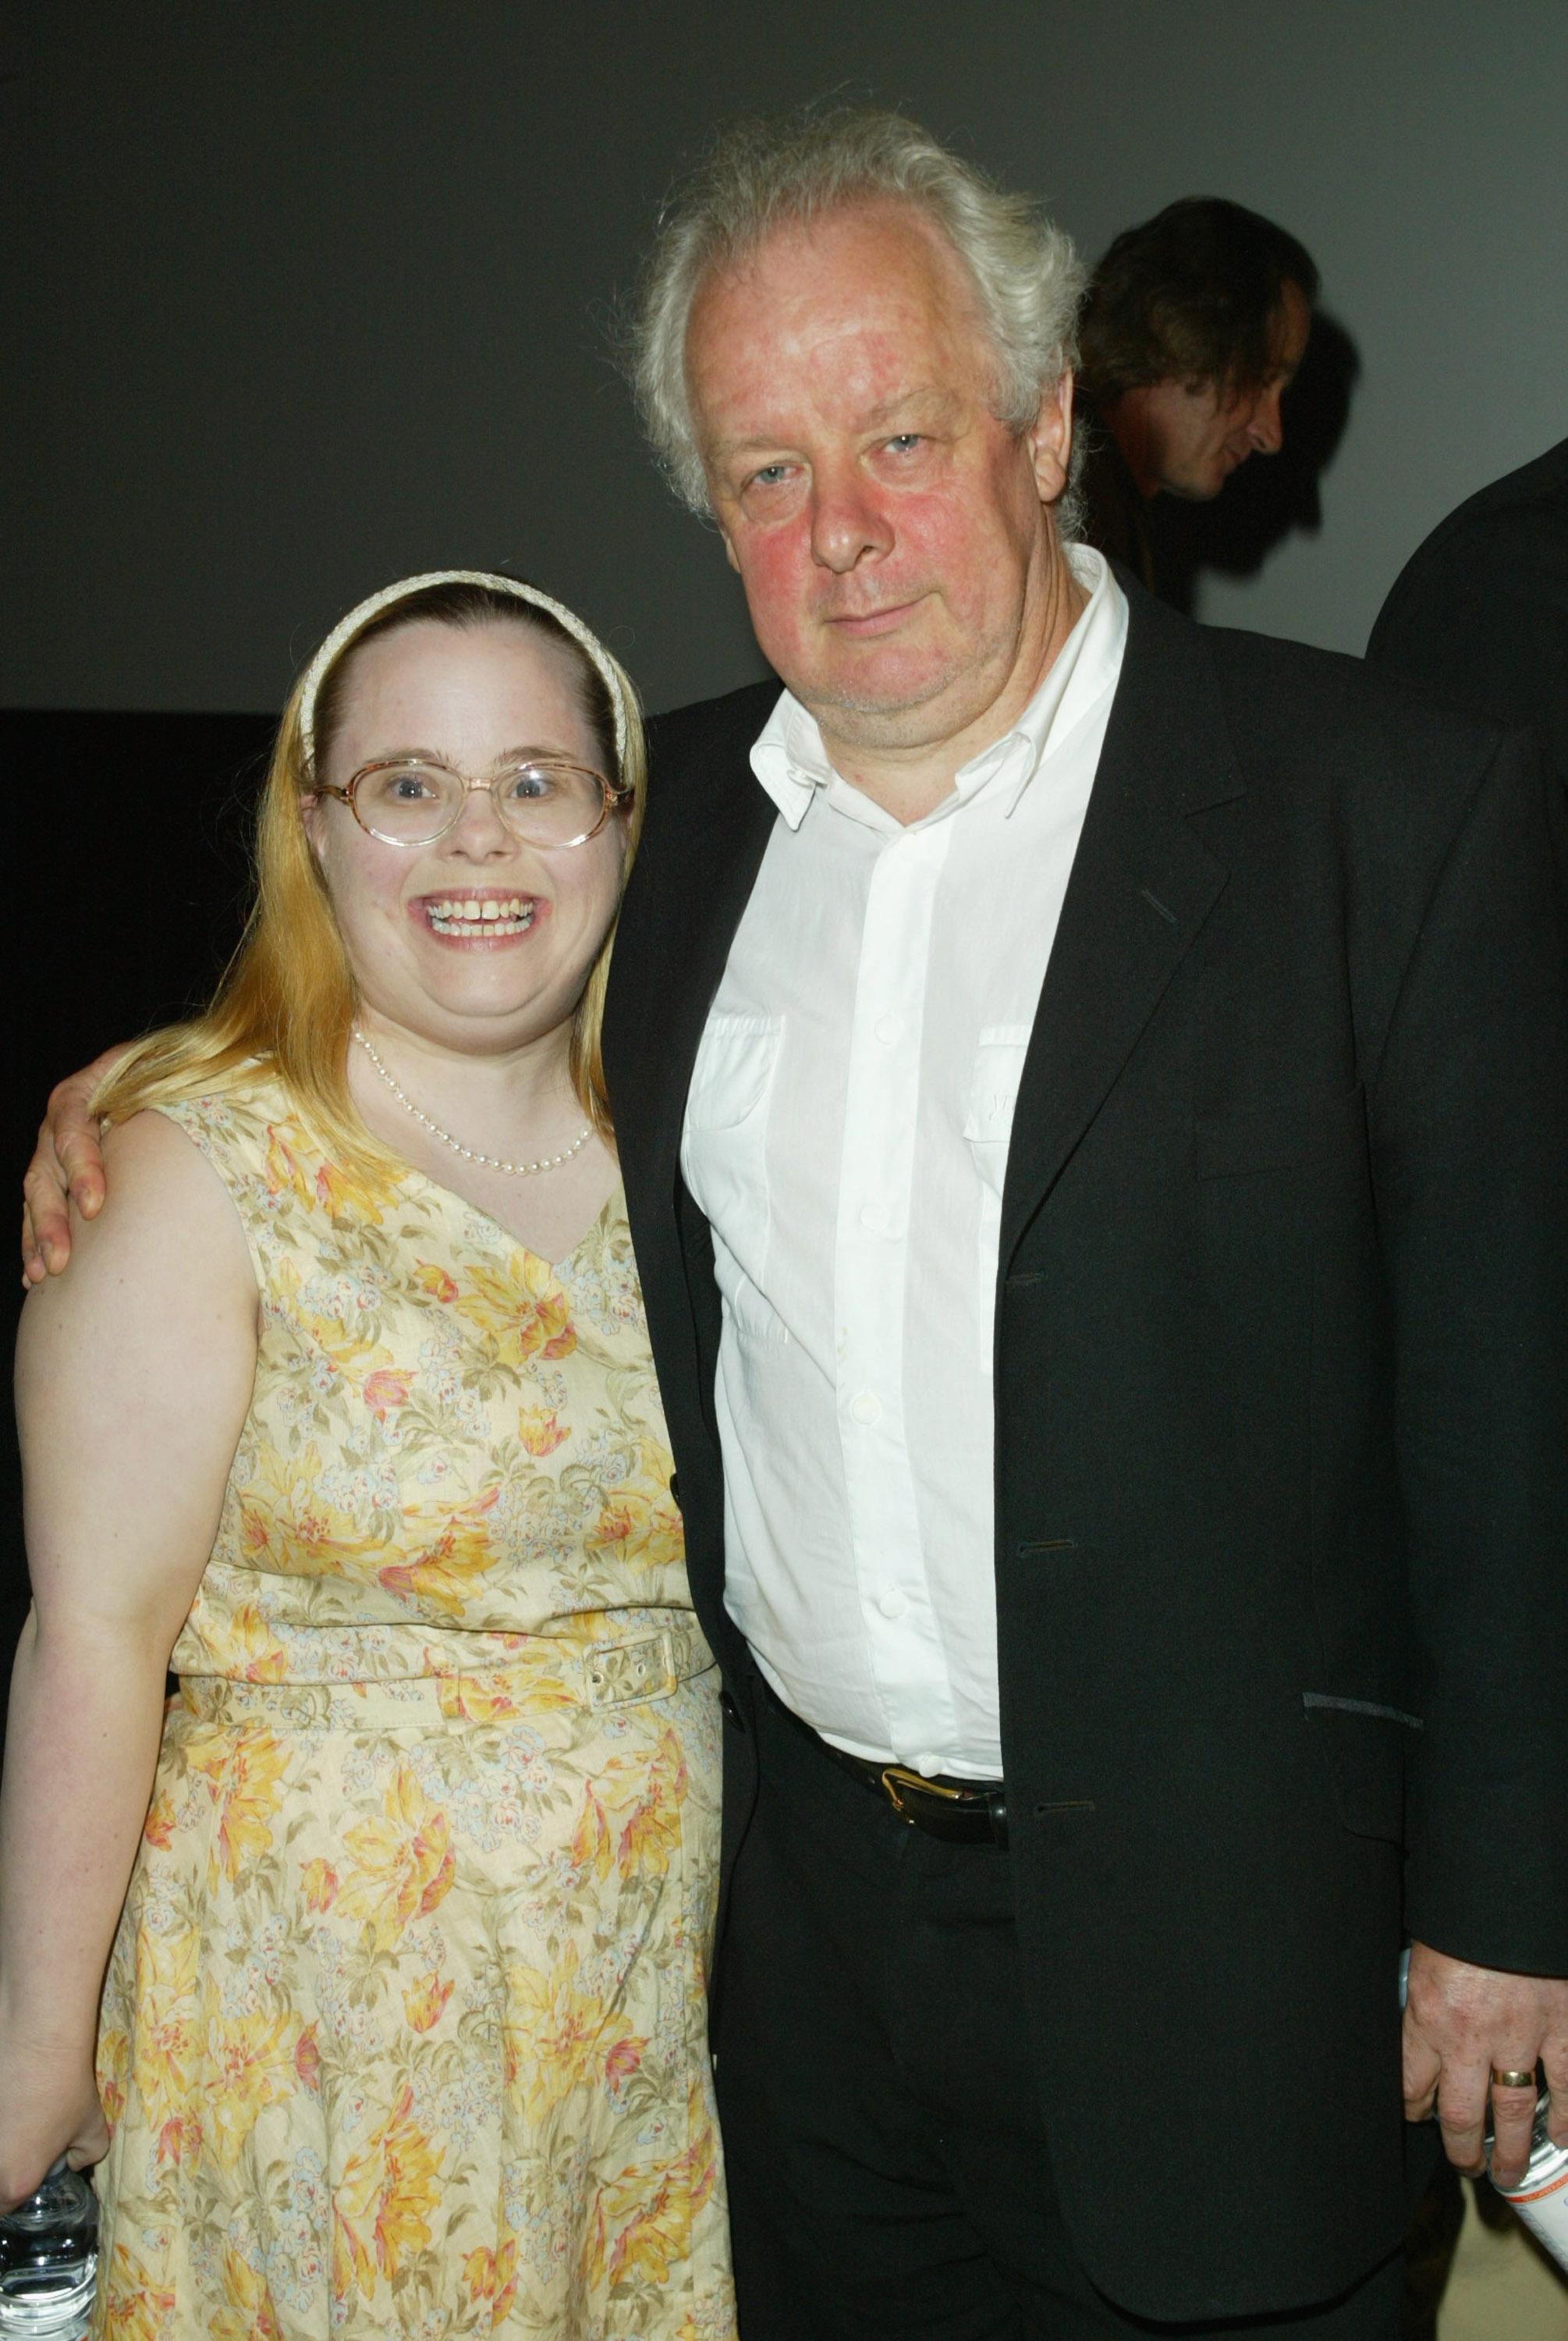 Andrea Fay Friedman and Jim Sheridan at the International Film Festival and Forum at the ArcLight, Media Forum July 27, 2003 in Hollywood, California | Source: Getty Images